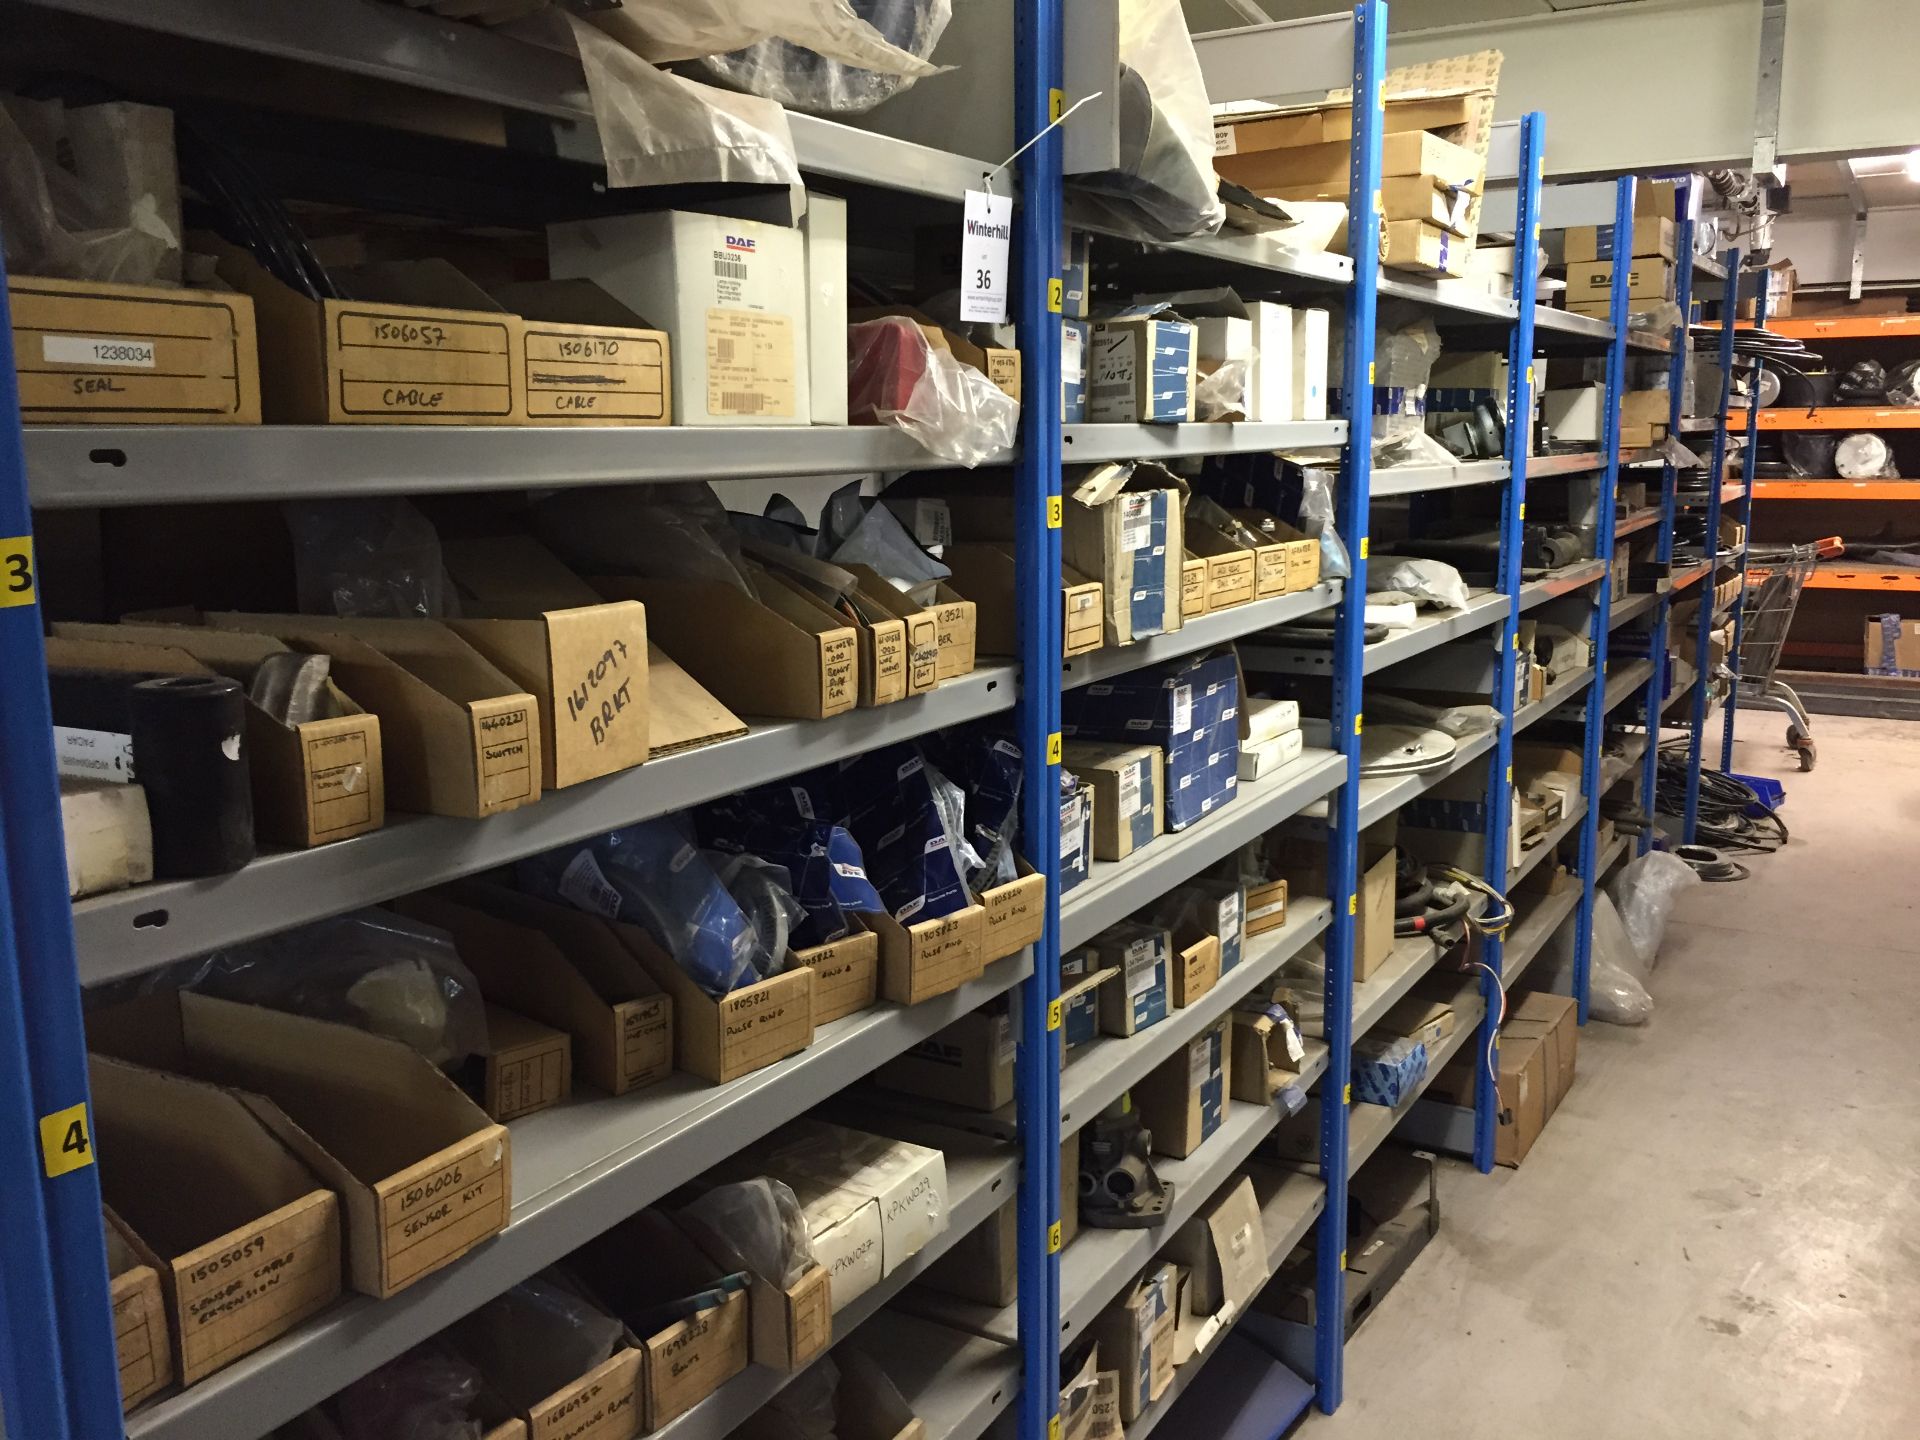 7 - Bays of Parts Shelving & Contents to Include: Cable, Brackets, Bolt Joints & Filters